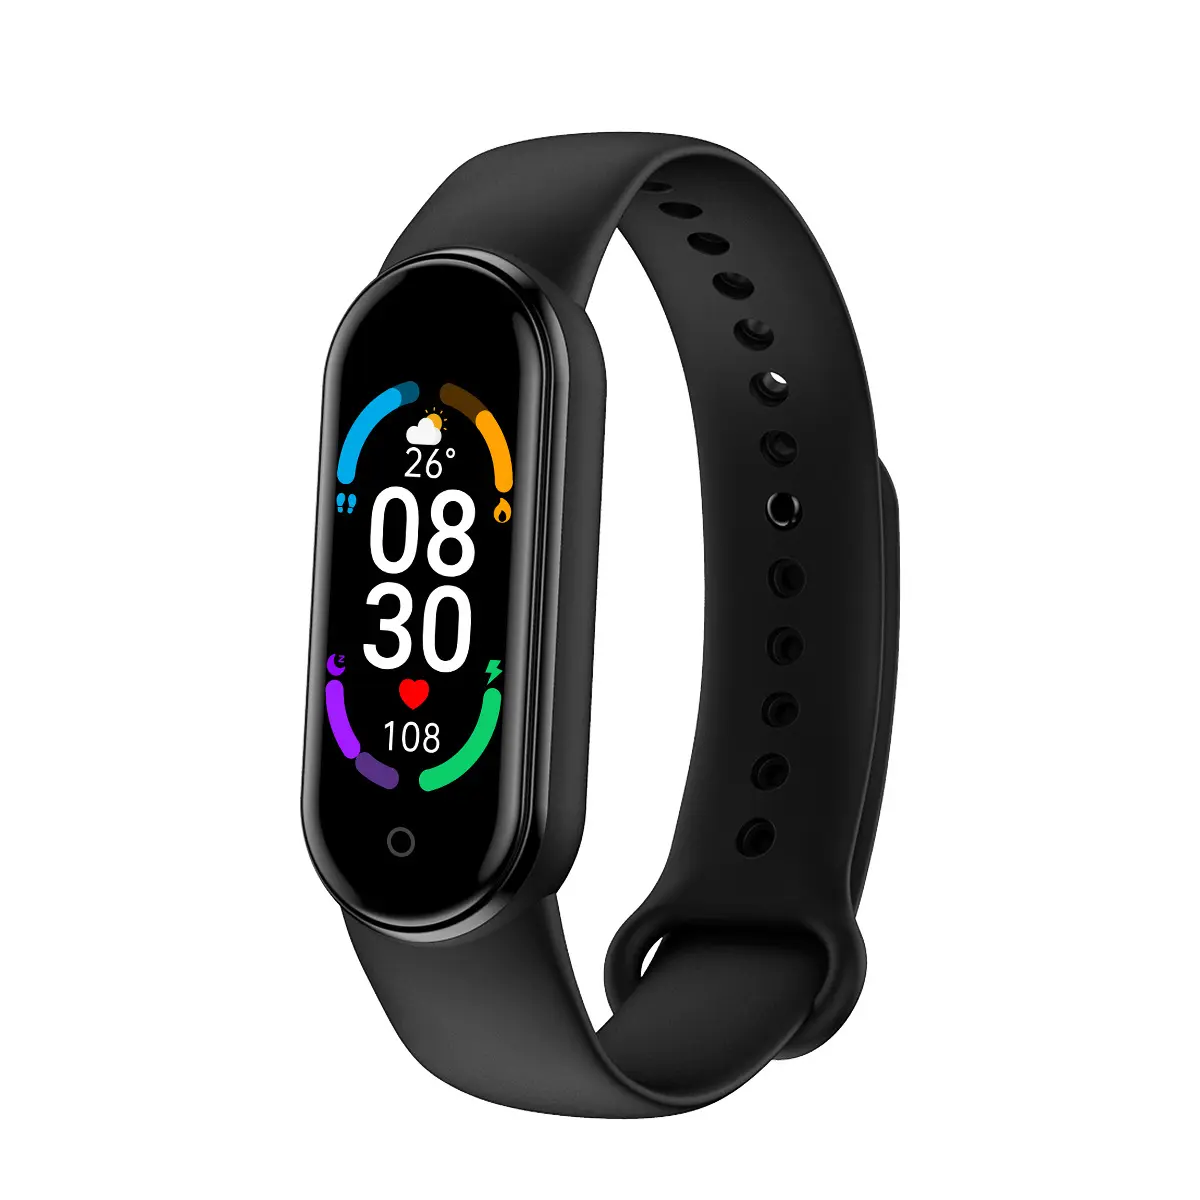 Smart Watches Smart Band Sport Fitness Tracker Pedometer Heart Rate Blood Pressure Monitor Bluetooth Bracelet